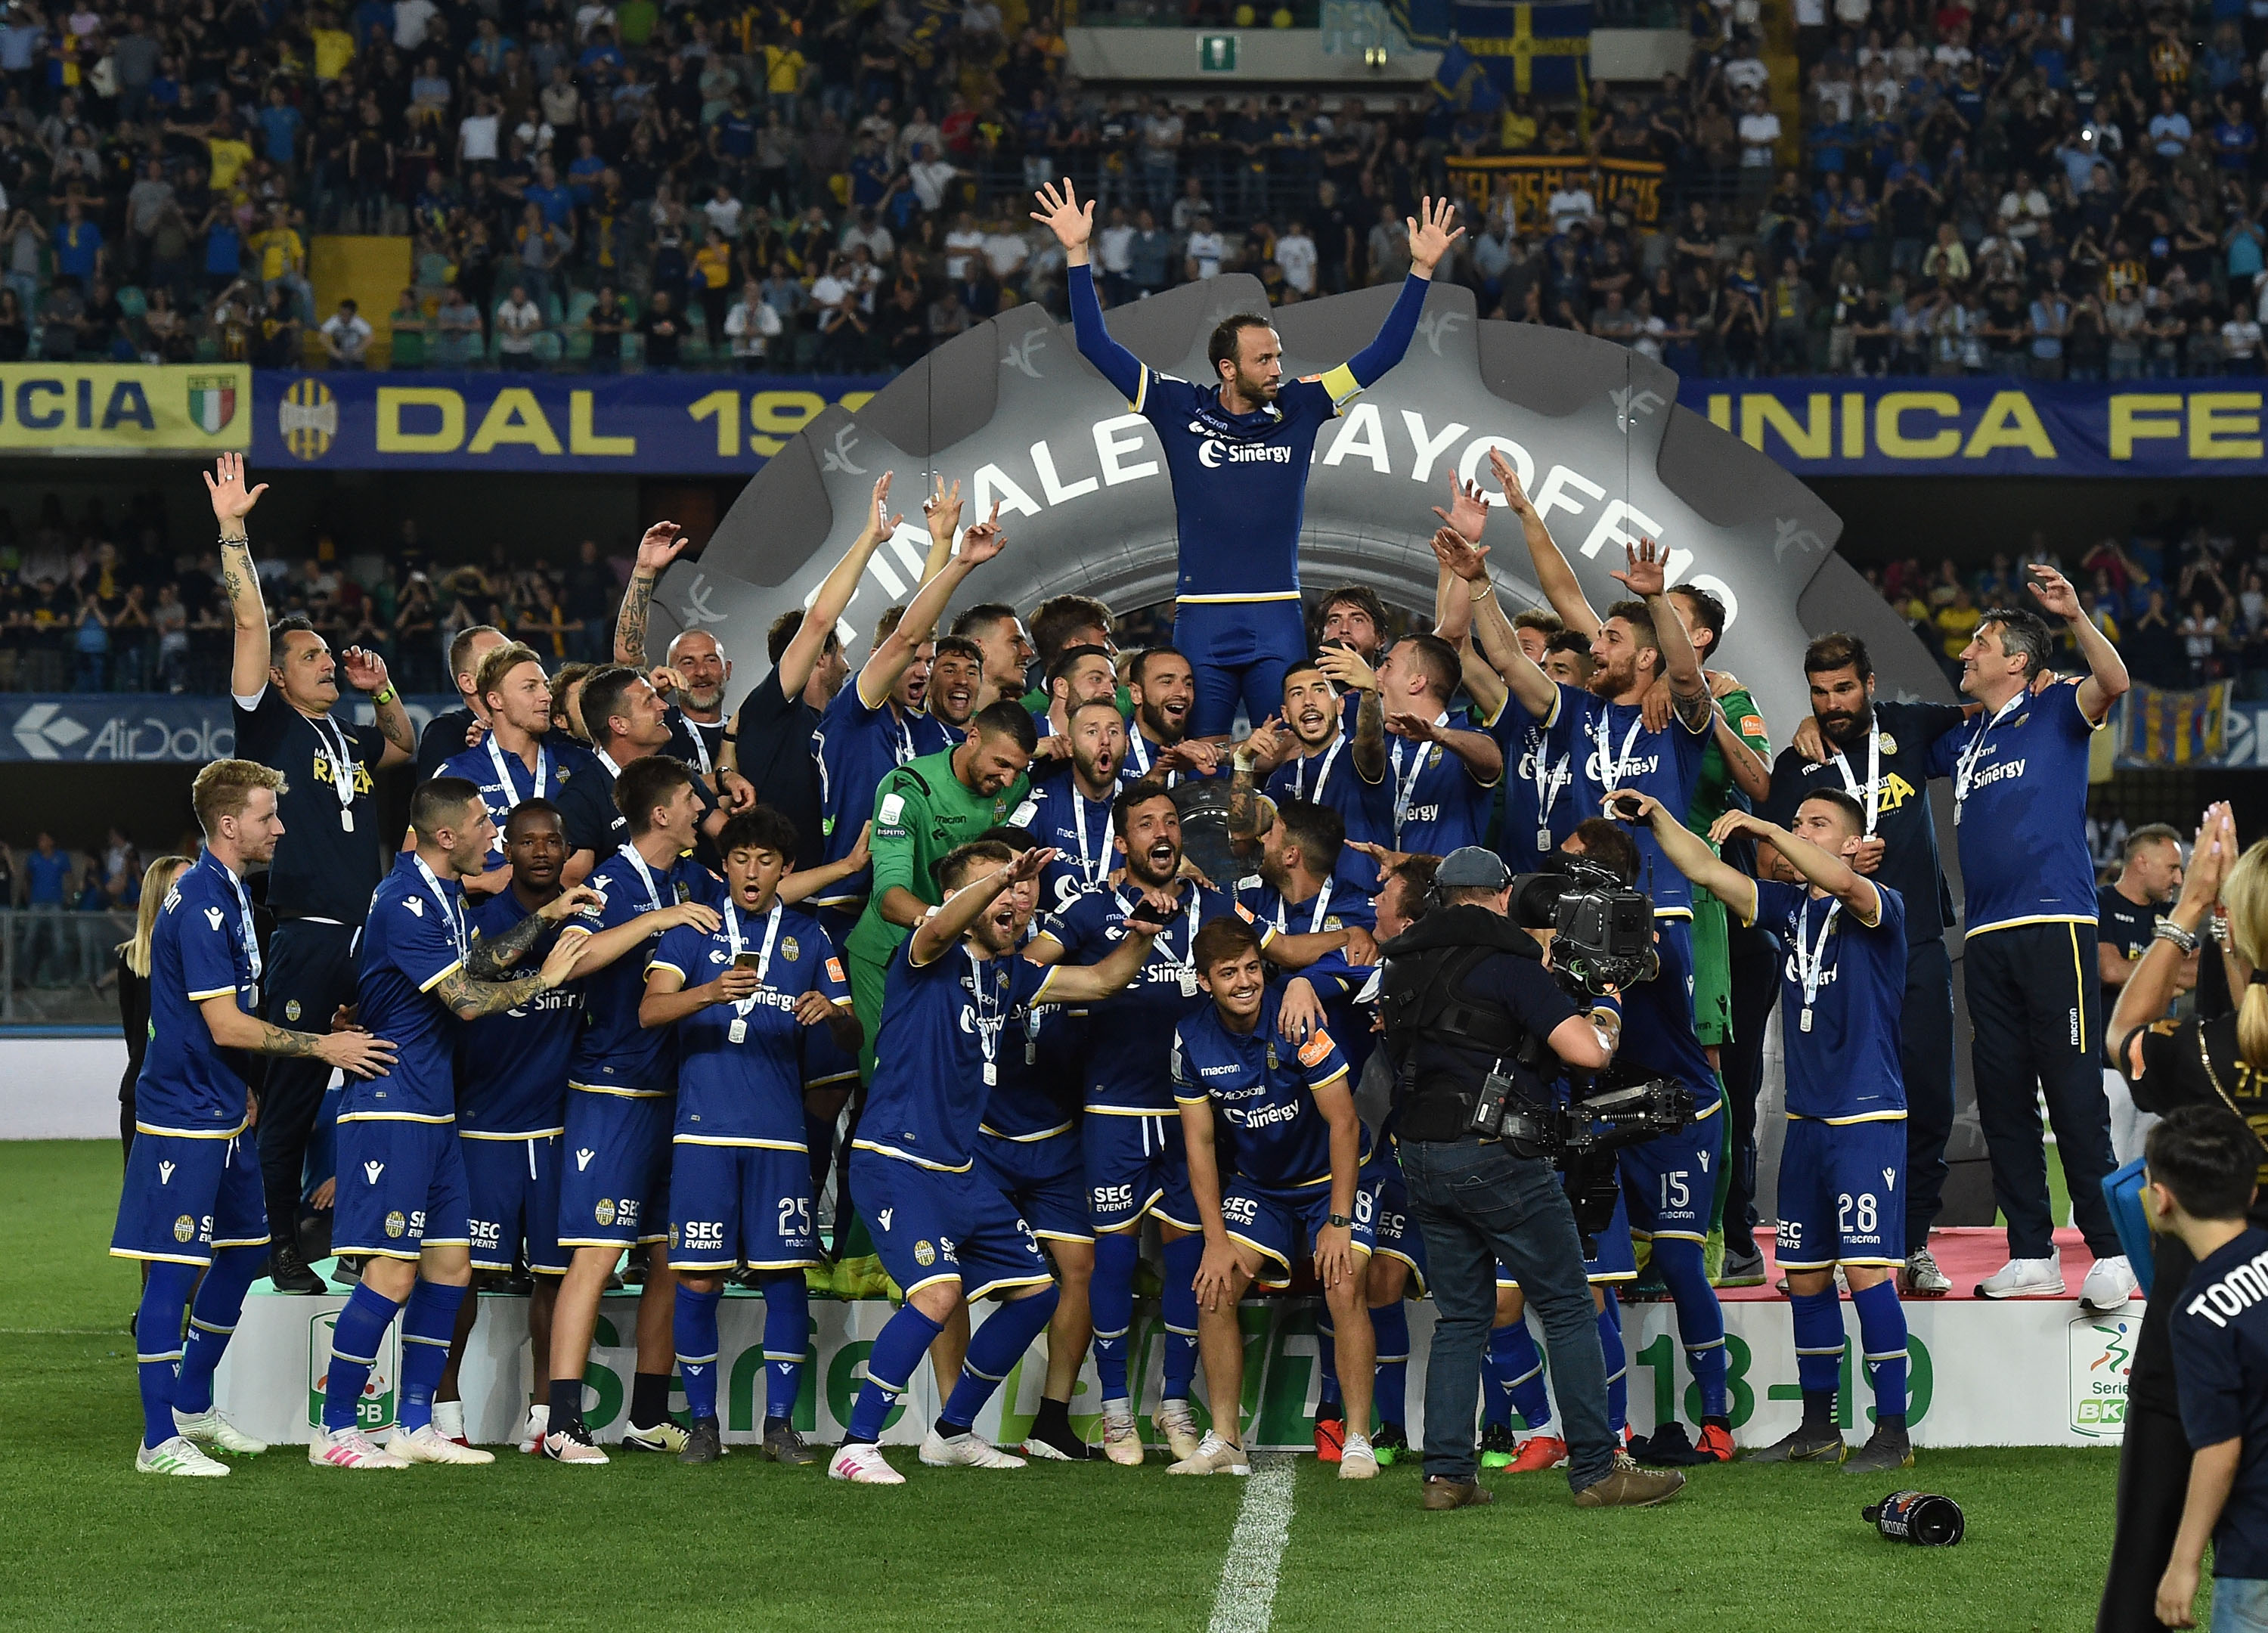 VERONA, ITALY - JUNE 02:  Players of Hellas Verona celebrate the victory after the Serie B Playoff Final second leg match between Hellas Verona and AS Cittadella at Stadio Marcantonio Bentegodi on June 2, 2019 in Verona, Italy.  (Photo by Giuseppe Bellini/Getty Images for Lega Serie B)